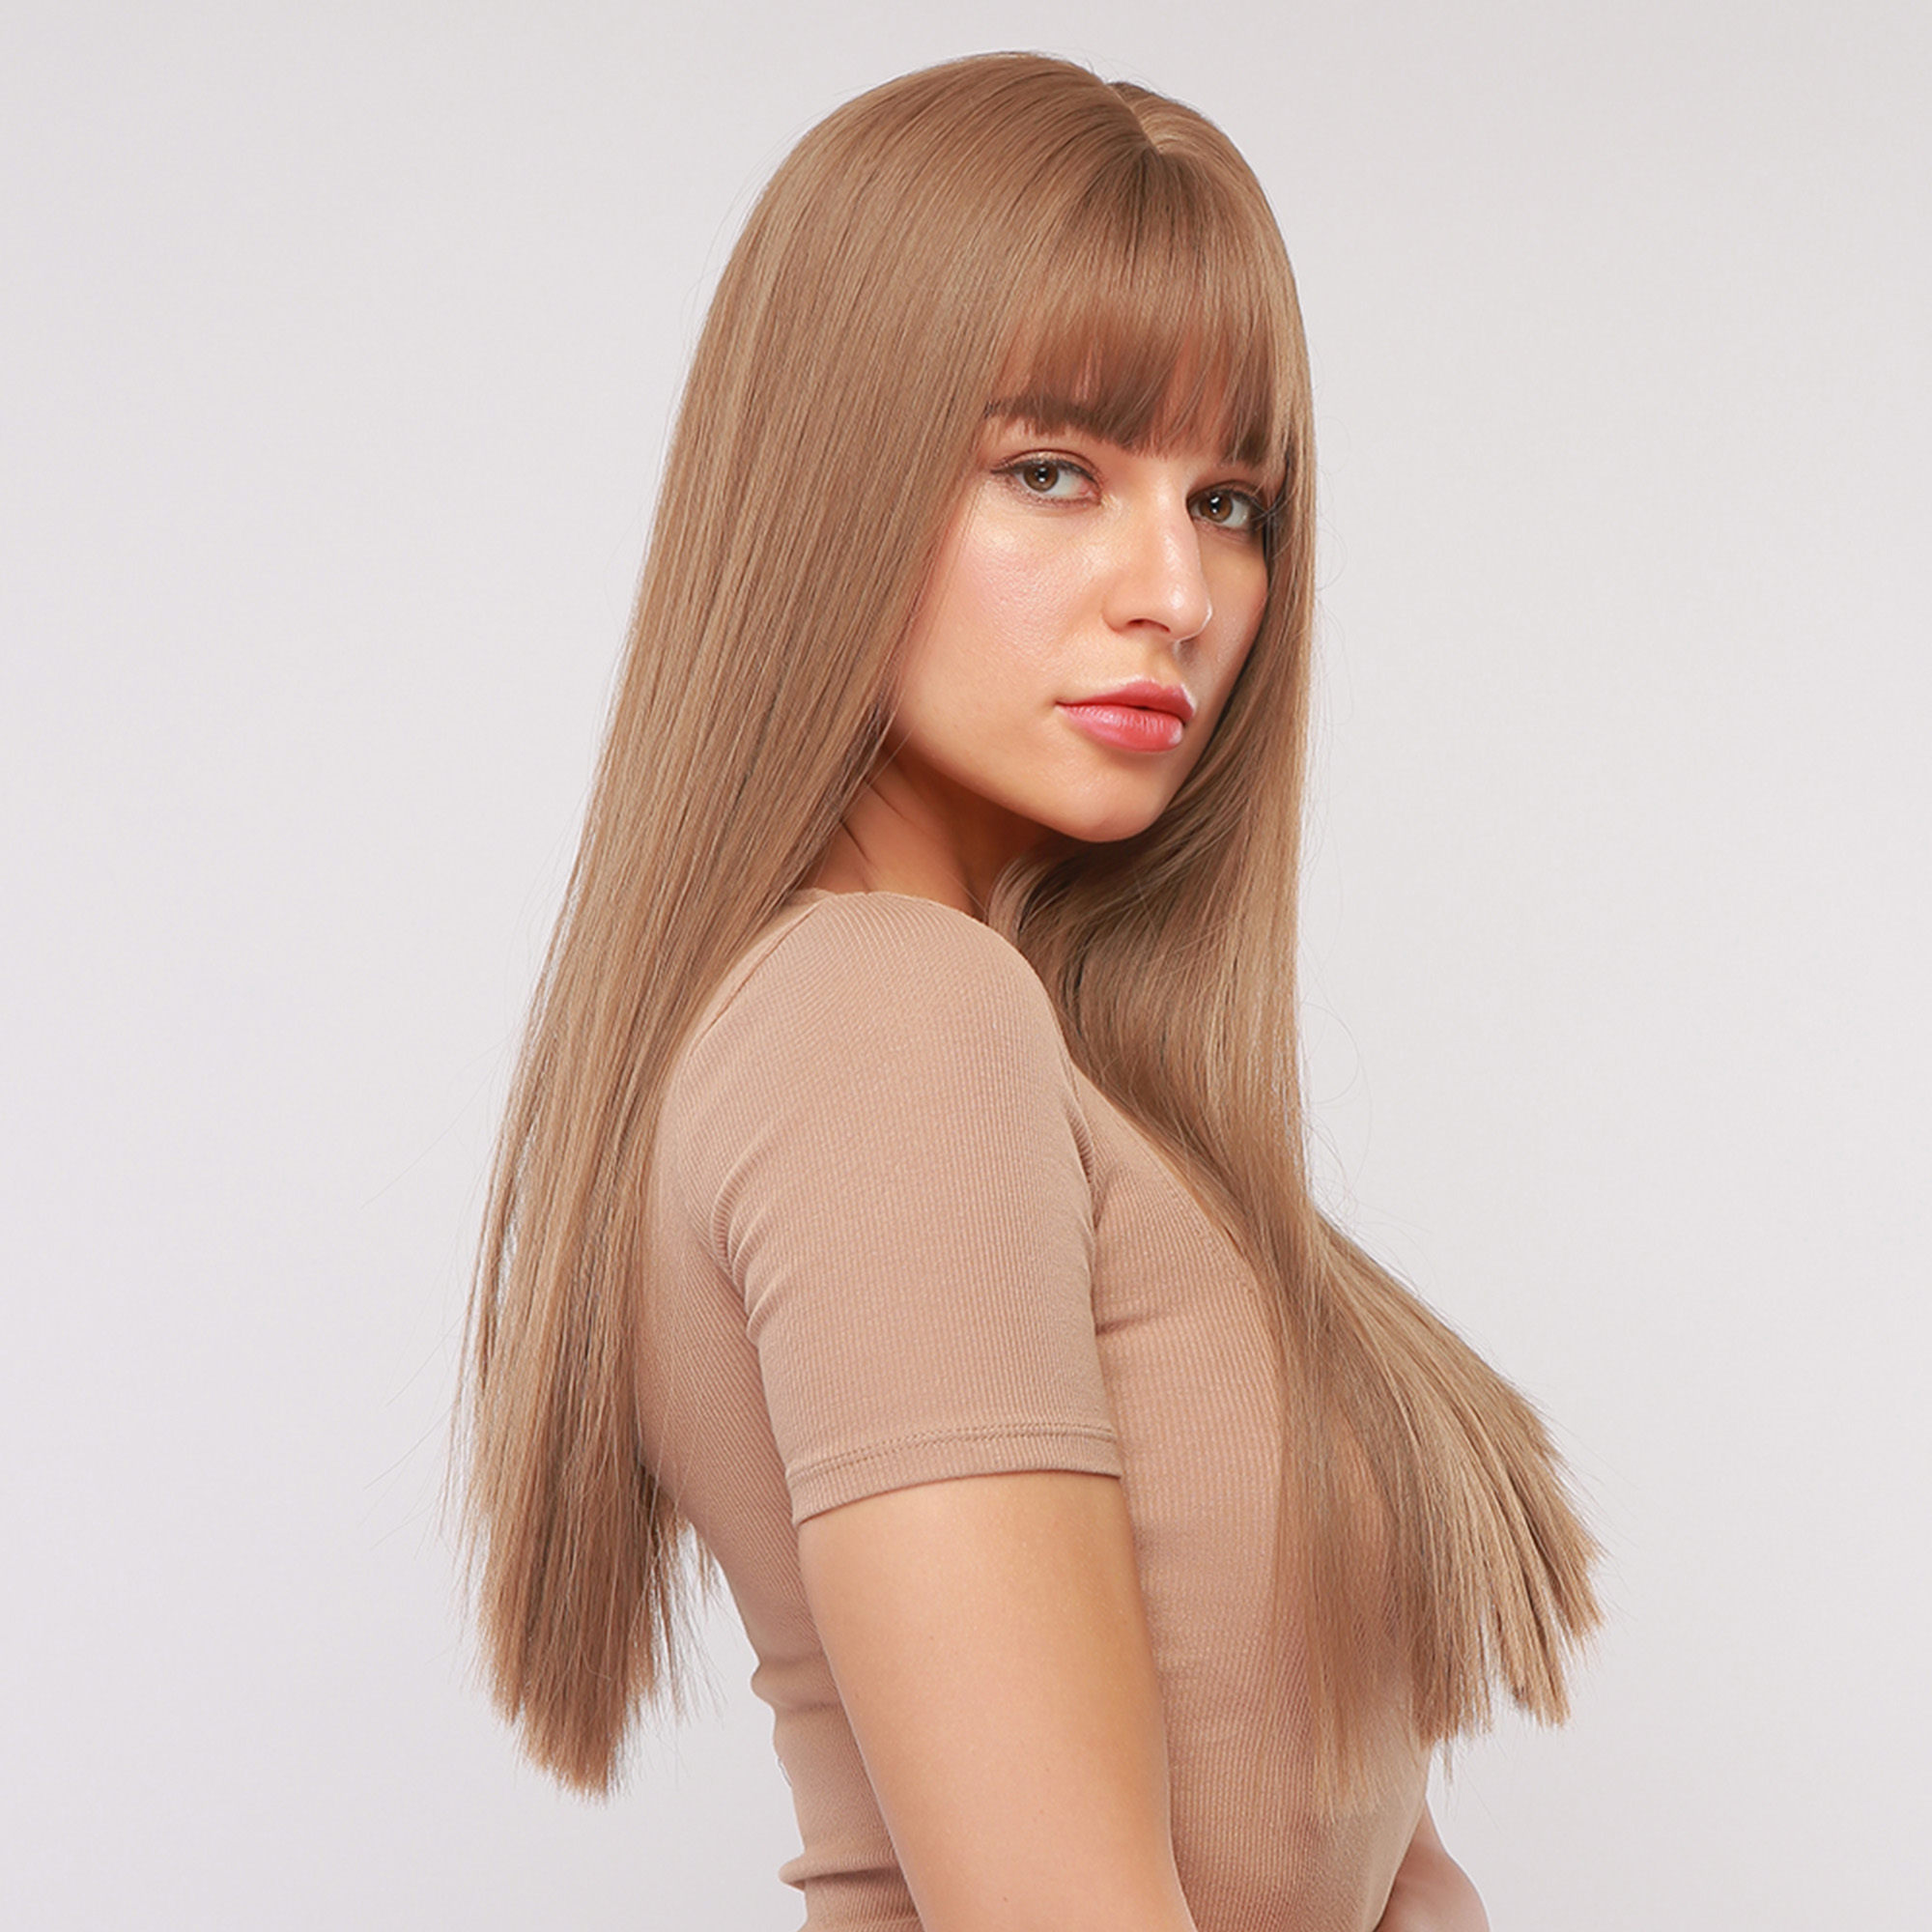 Women's Long Natural Straigt Synthetic Hair With Bangs Capless Wig 26 Inches